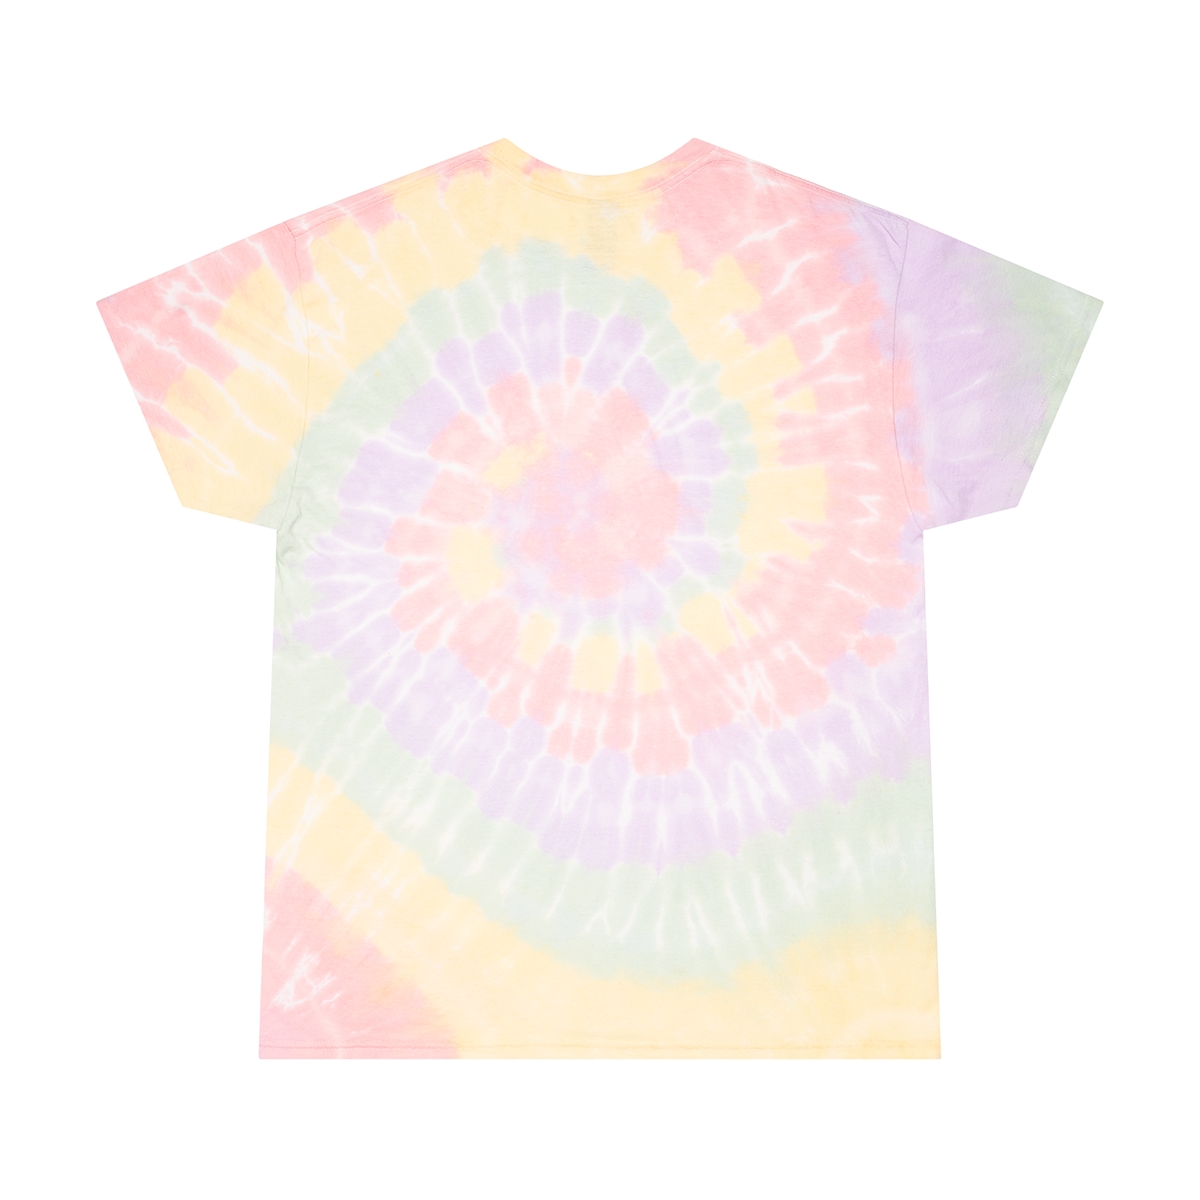 The Moppets present: A very colorful T-shirt product thumbnail image